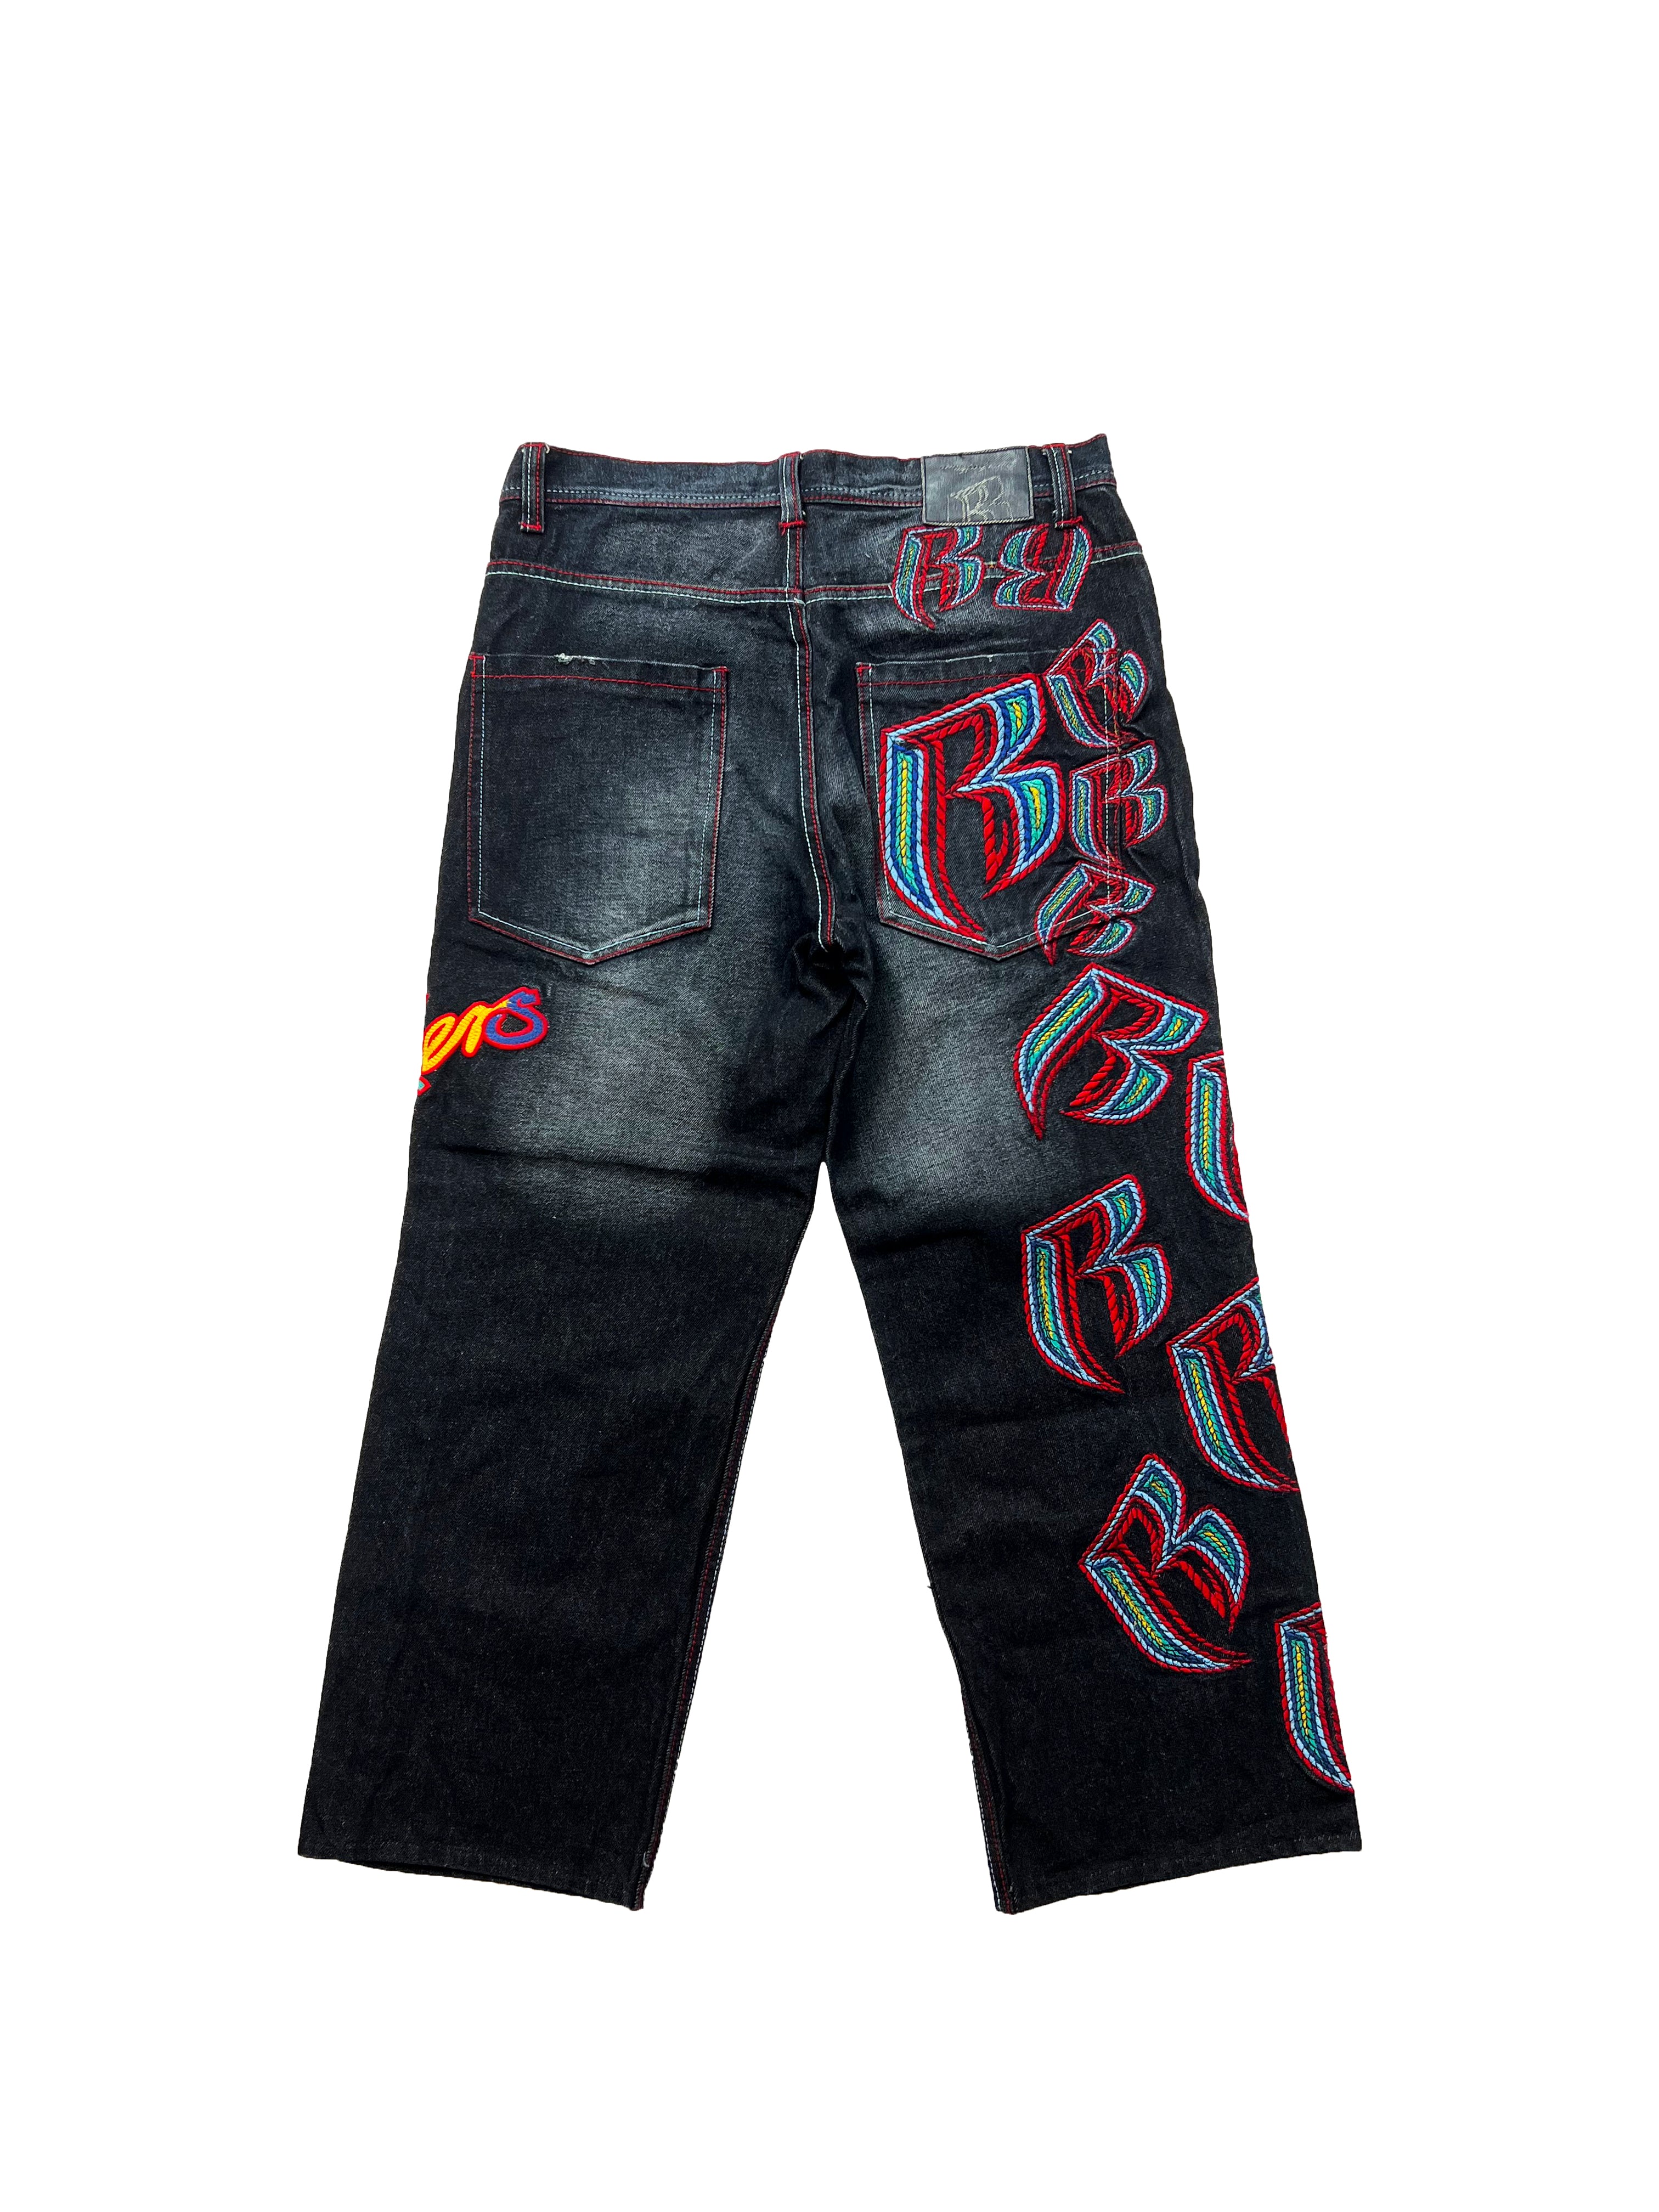 Ruff Ryders Embroidered Spell Out Jeans 90's